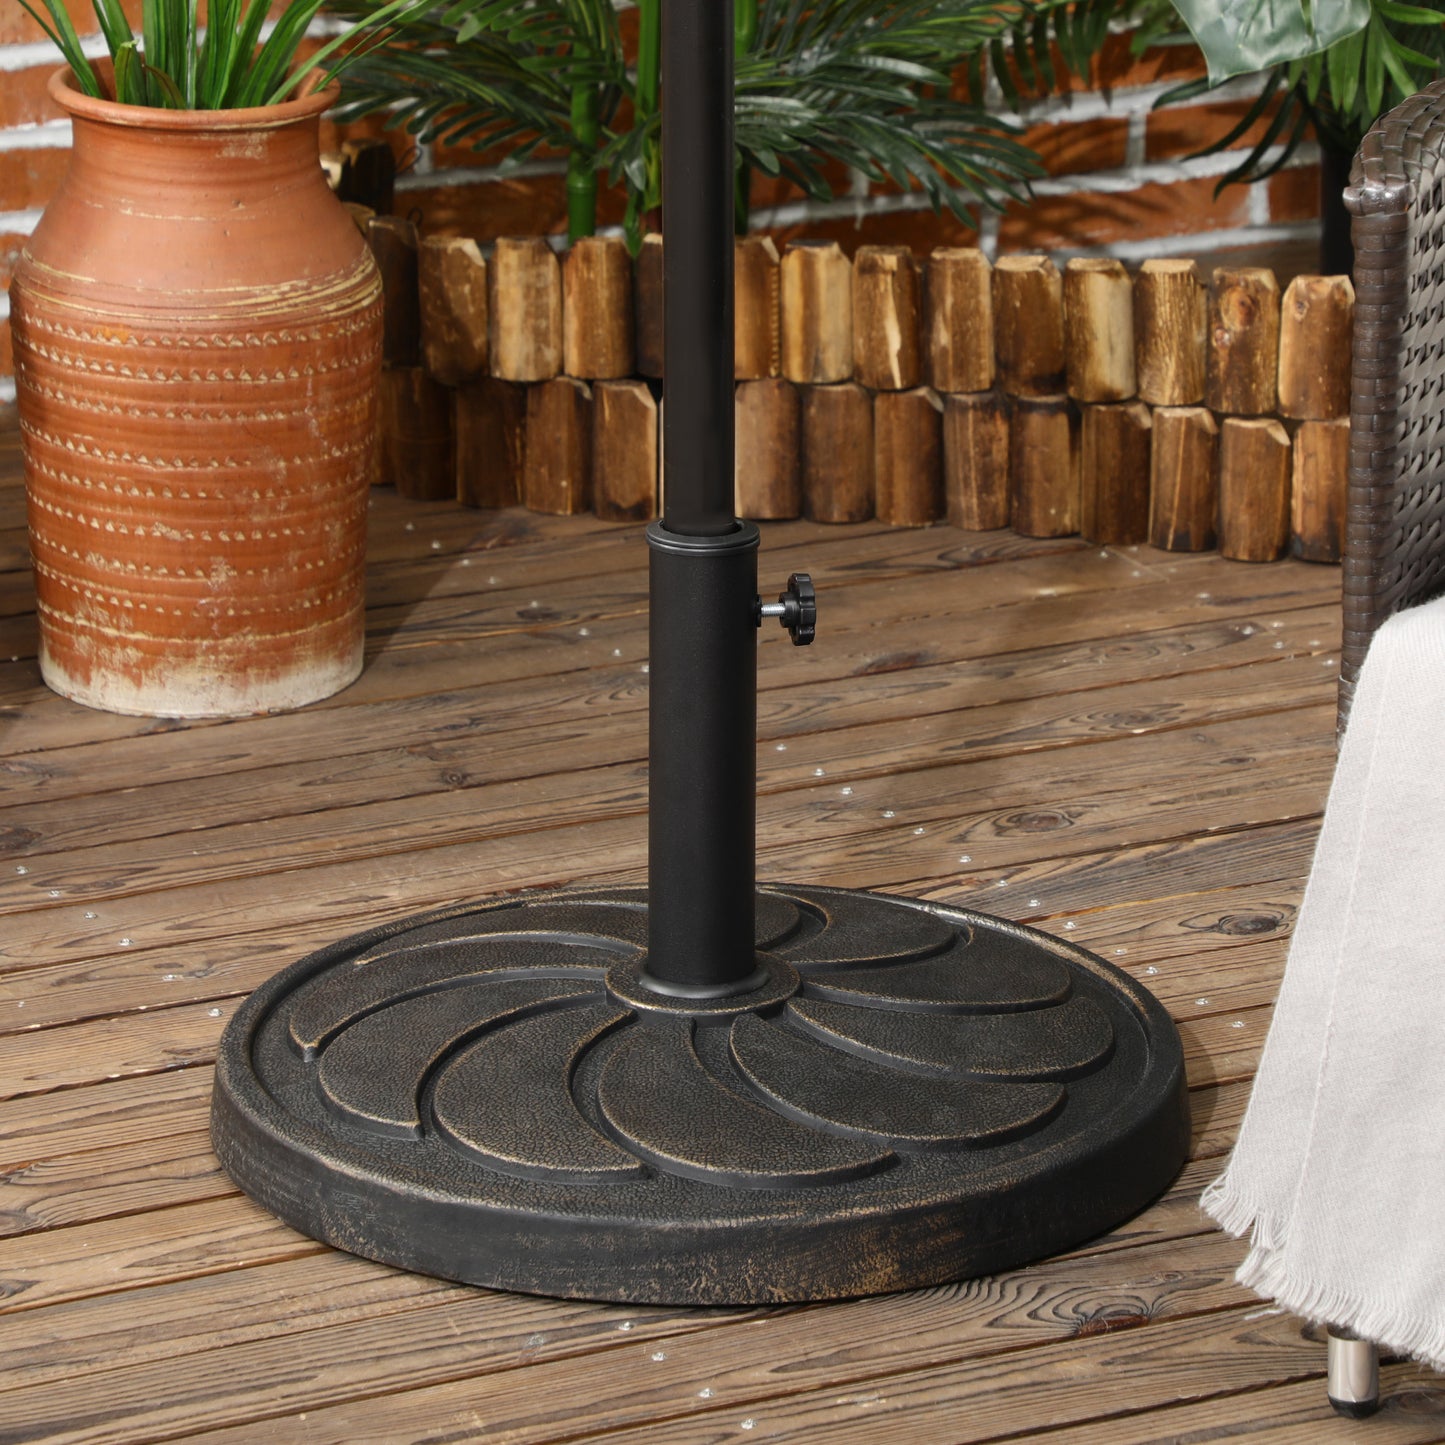 Outsunny 18kg Resin Garden Parasol Base, Round Outdoor Market Umbrella Stand Weight for Poles of Φ38mm to Φ48mm, Bronze